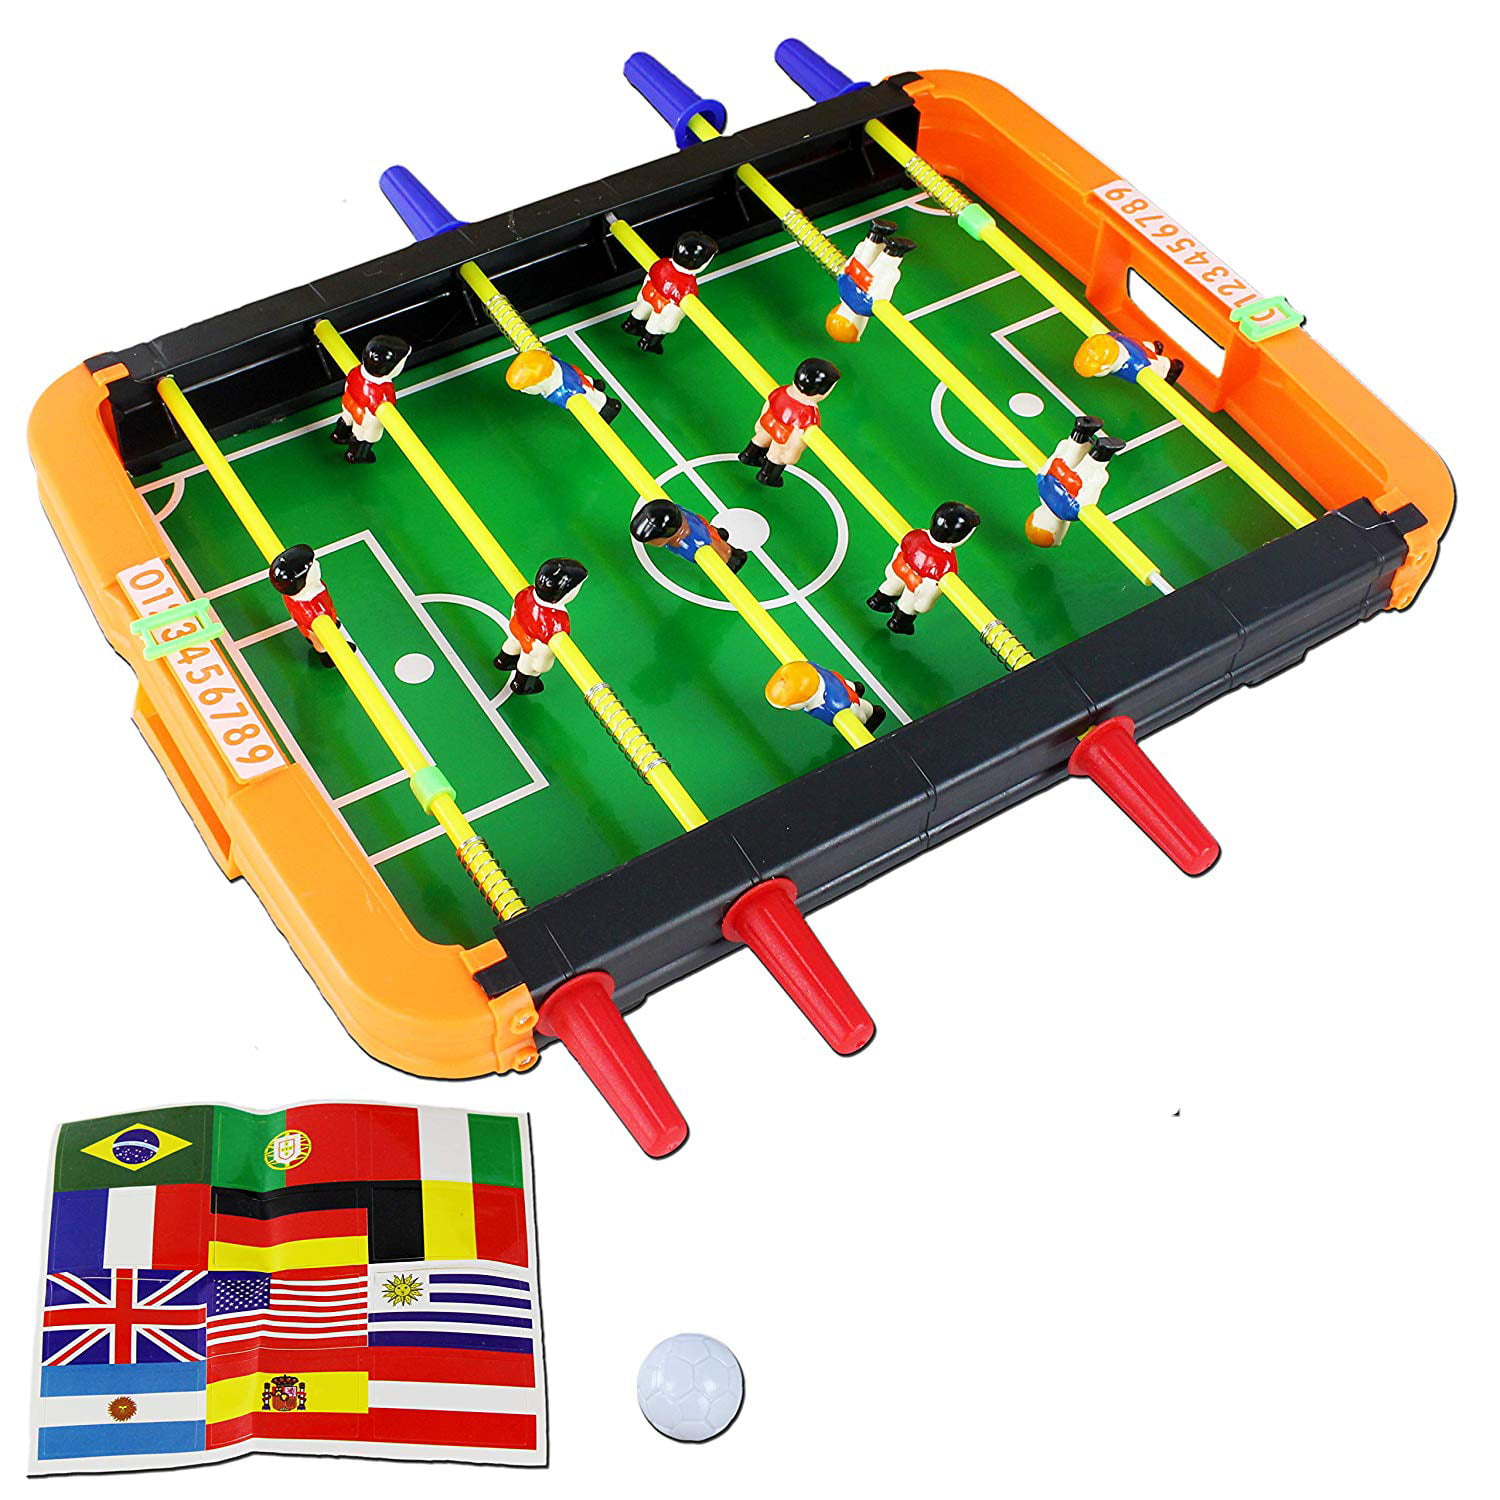 Details about   Foosball Table Soccerball Sports Gift Indoor Game for Party Kid Play Toys NEW 